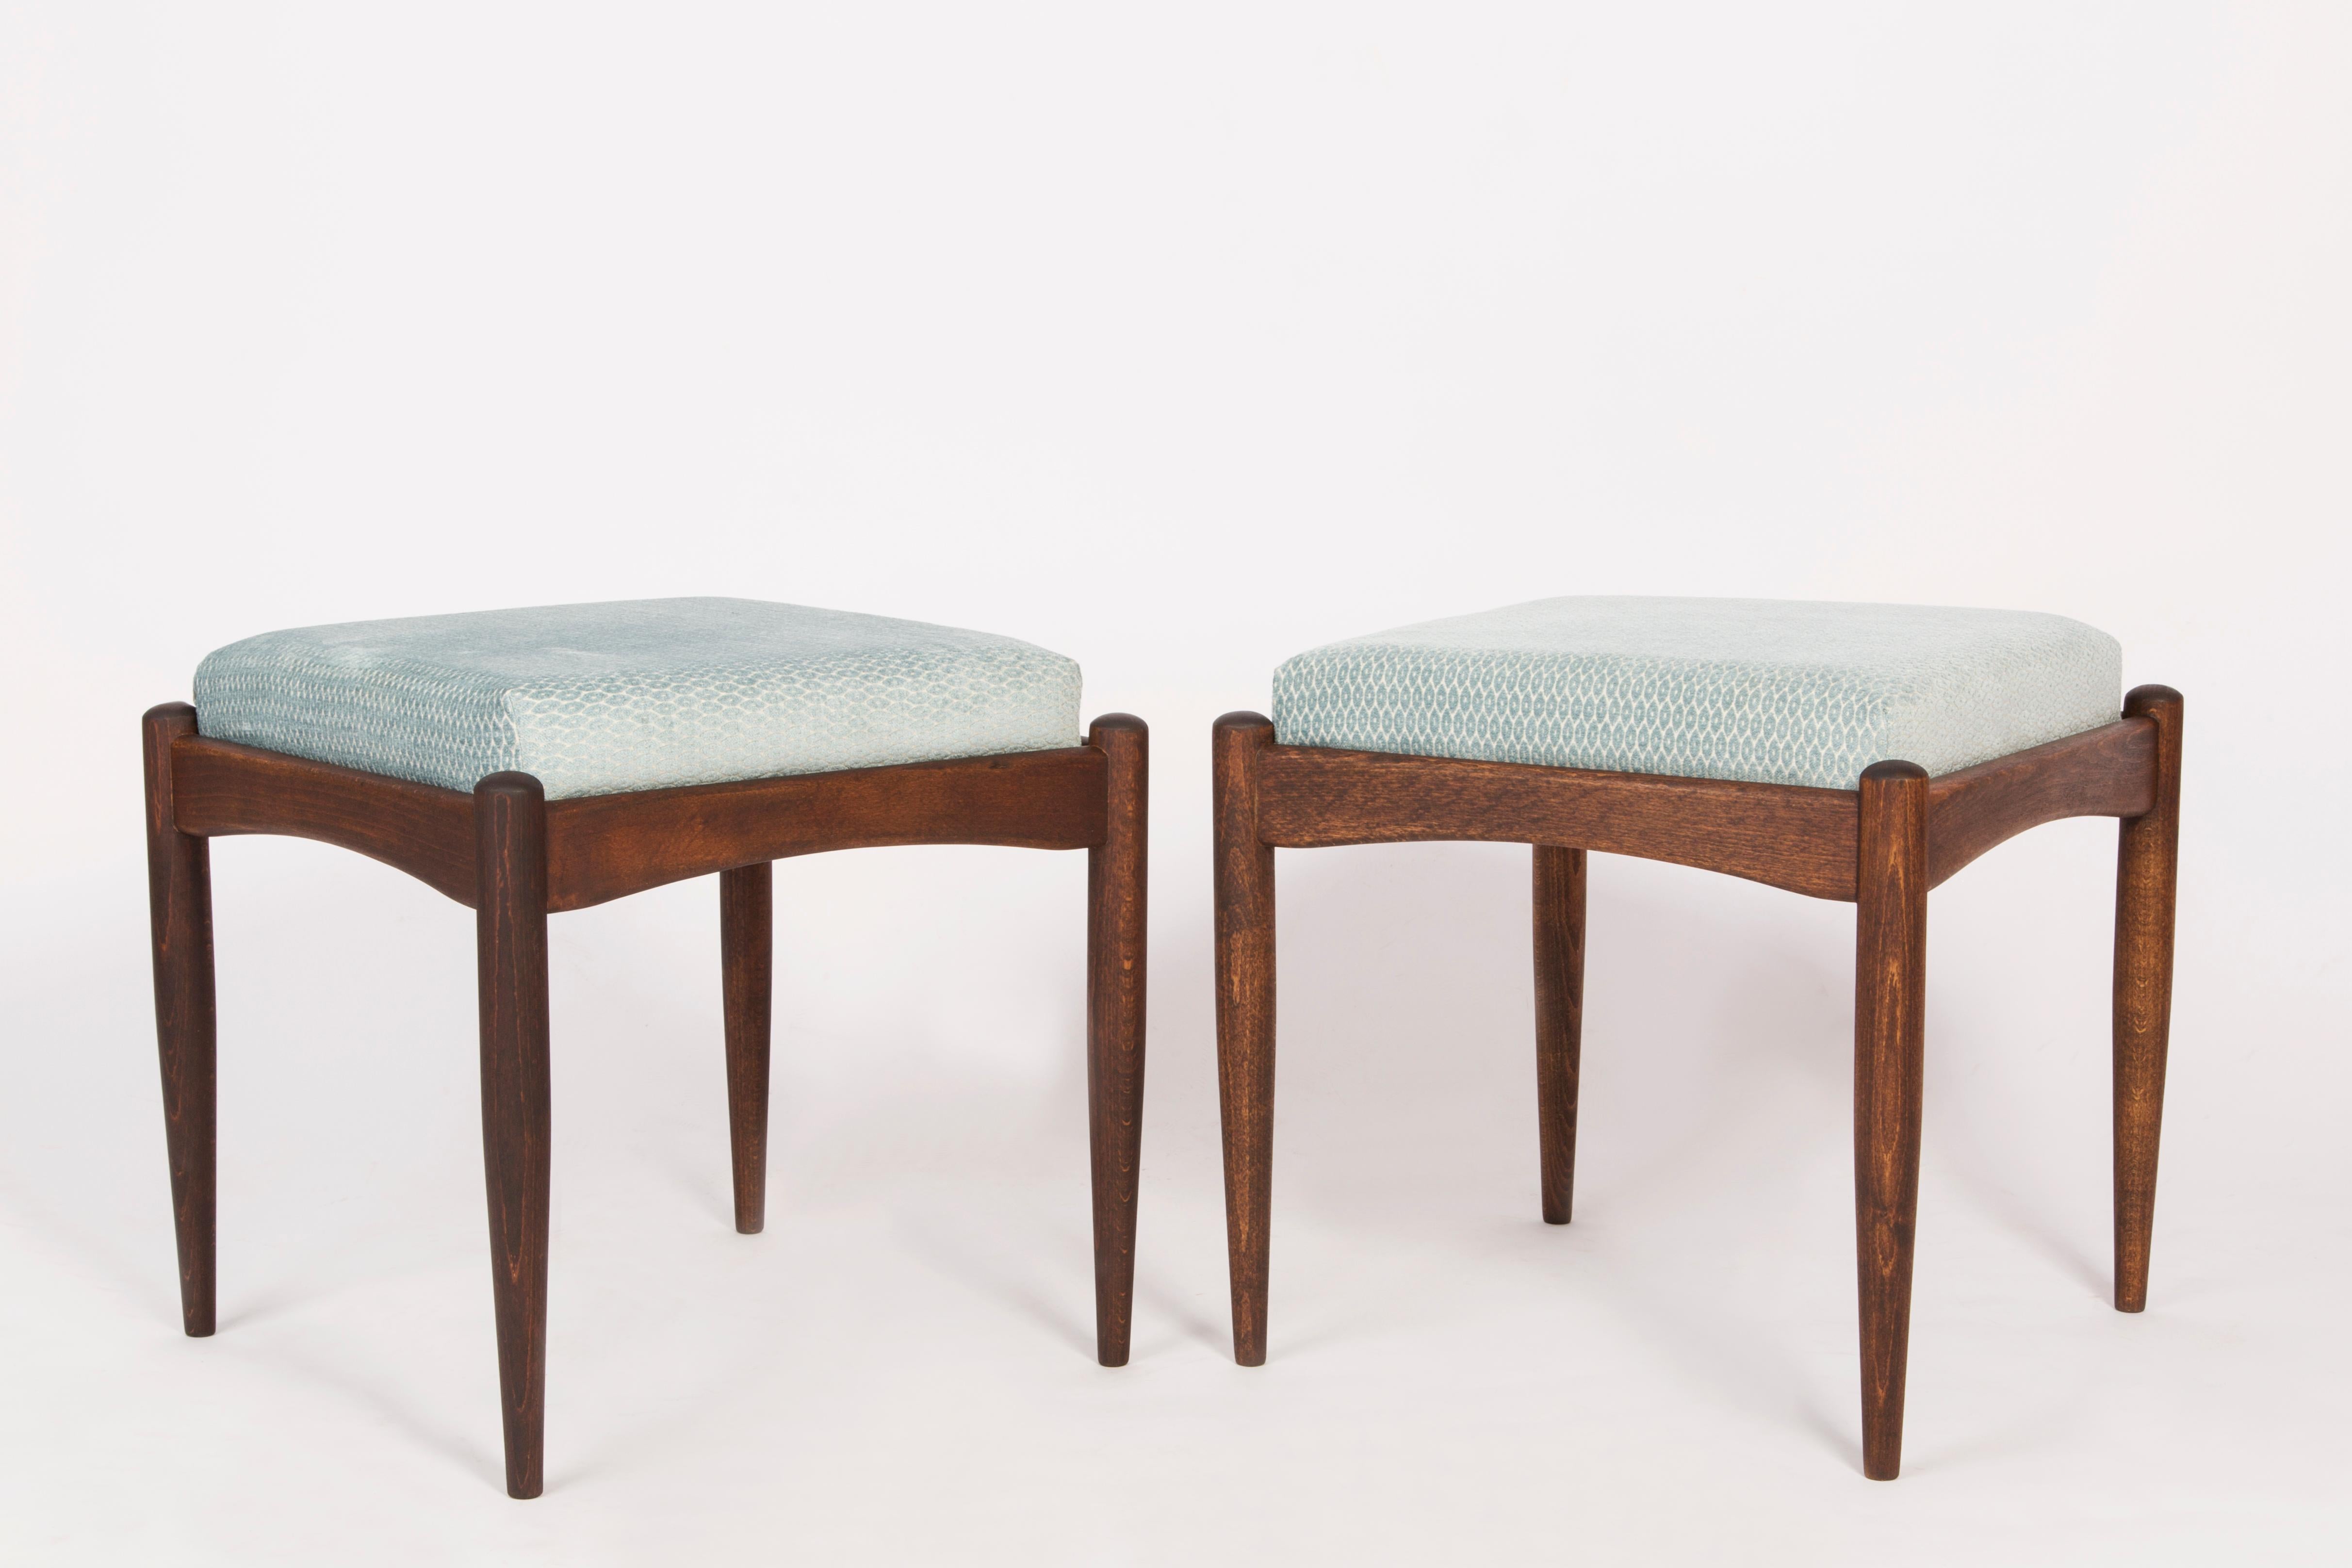 Stools from the turn of the 1960s and 1970s. Beautiful velvet blue upholstery. The stools consists of an upholstered part, a seat and wooden legs narrowing downwards, characteristic of the 1960s style. We can prepare this pair also in another color